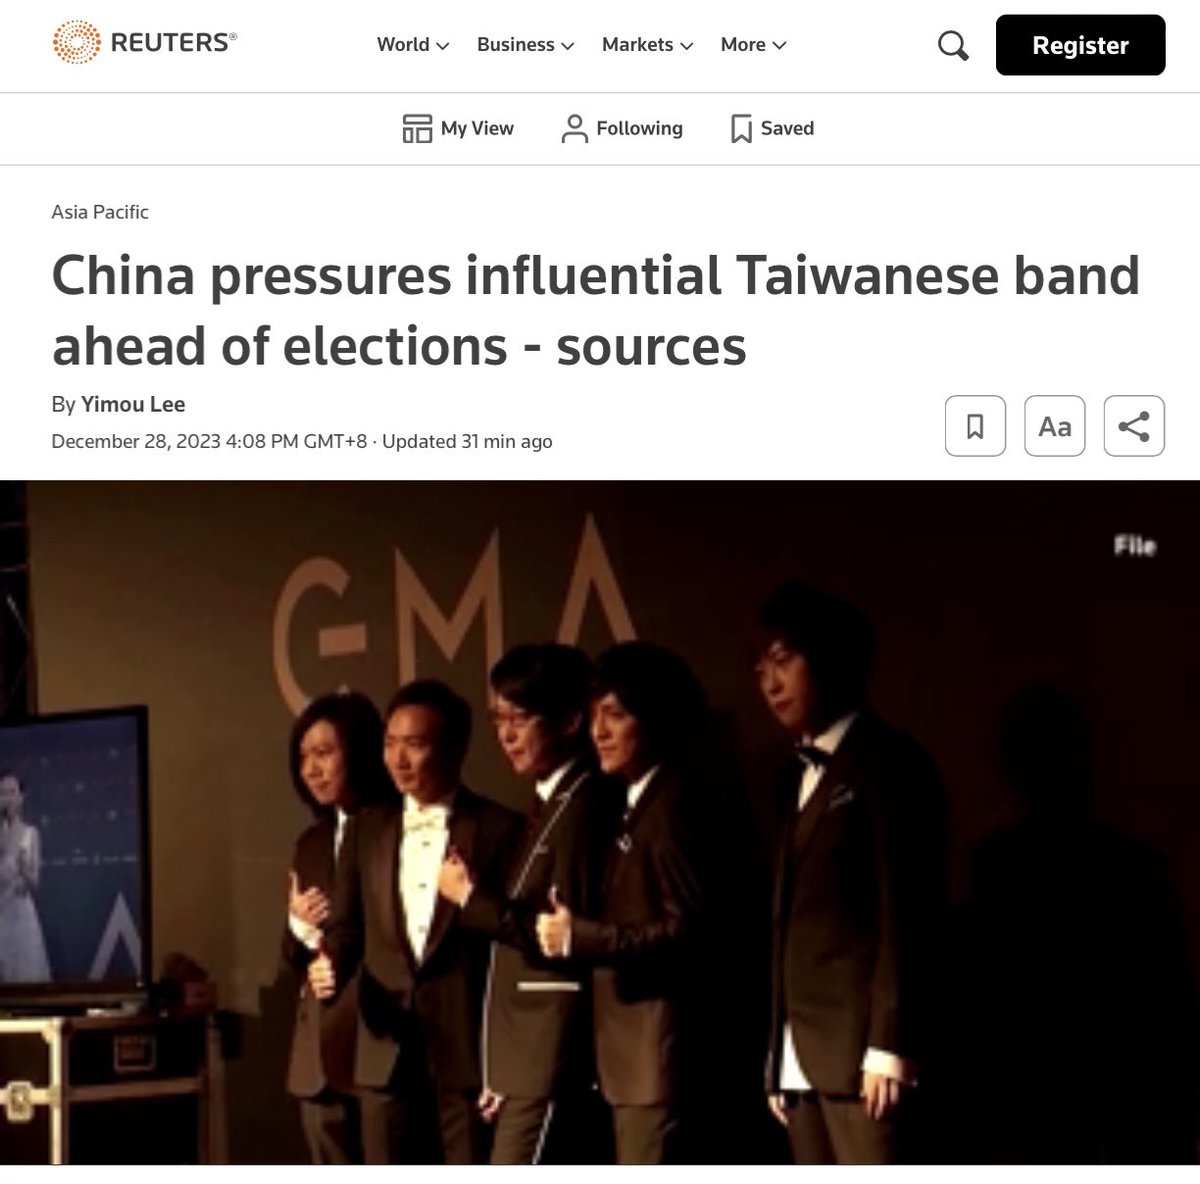 National Radio & Television Administration (国家广播电视总局) — under  CCP Publicity Department (中宣部) — has pressured influential Taiwanese rock band Mayday (五月天) to join China's media propaganda on Taiwan and make pro-China comments — publicly voicing support for Beijing's claims that democratically governed Taiwan is part of China — ahead of Taiwan's key elections next month